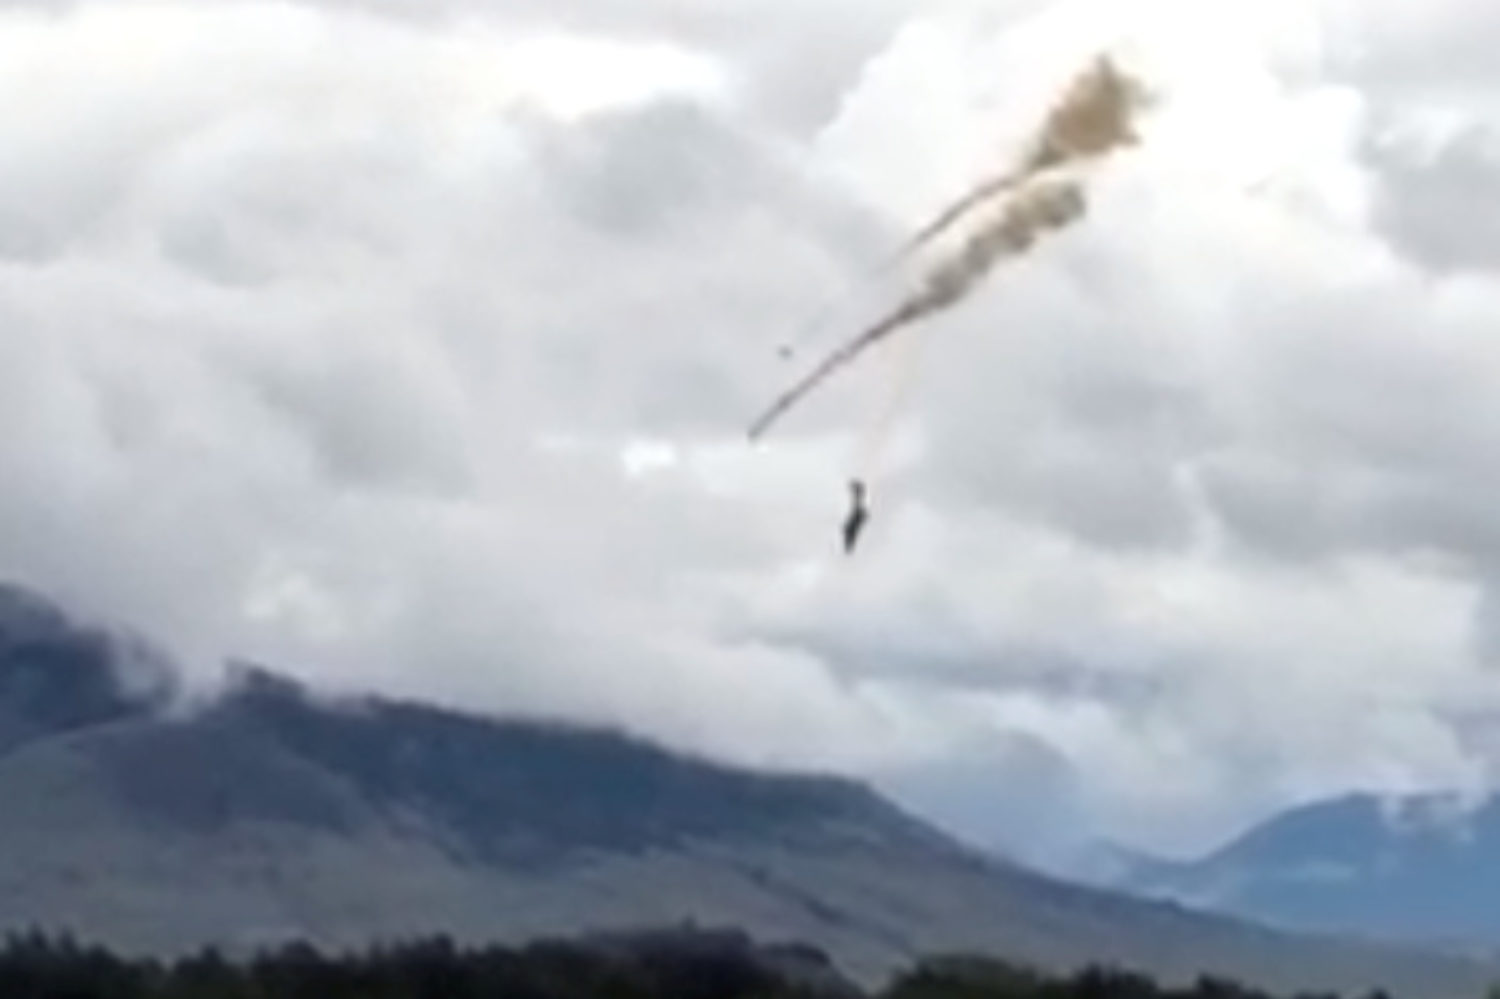 A plane of the Royal Canadian Air Force's Snowbirds aerobatic demonstration team is seen prior crashing in Kamloops, British Columbia, Canada May 17, 2020, in this still image obtained from a social media video. Shannon Forrest/via REUTERS